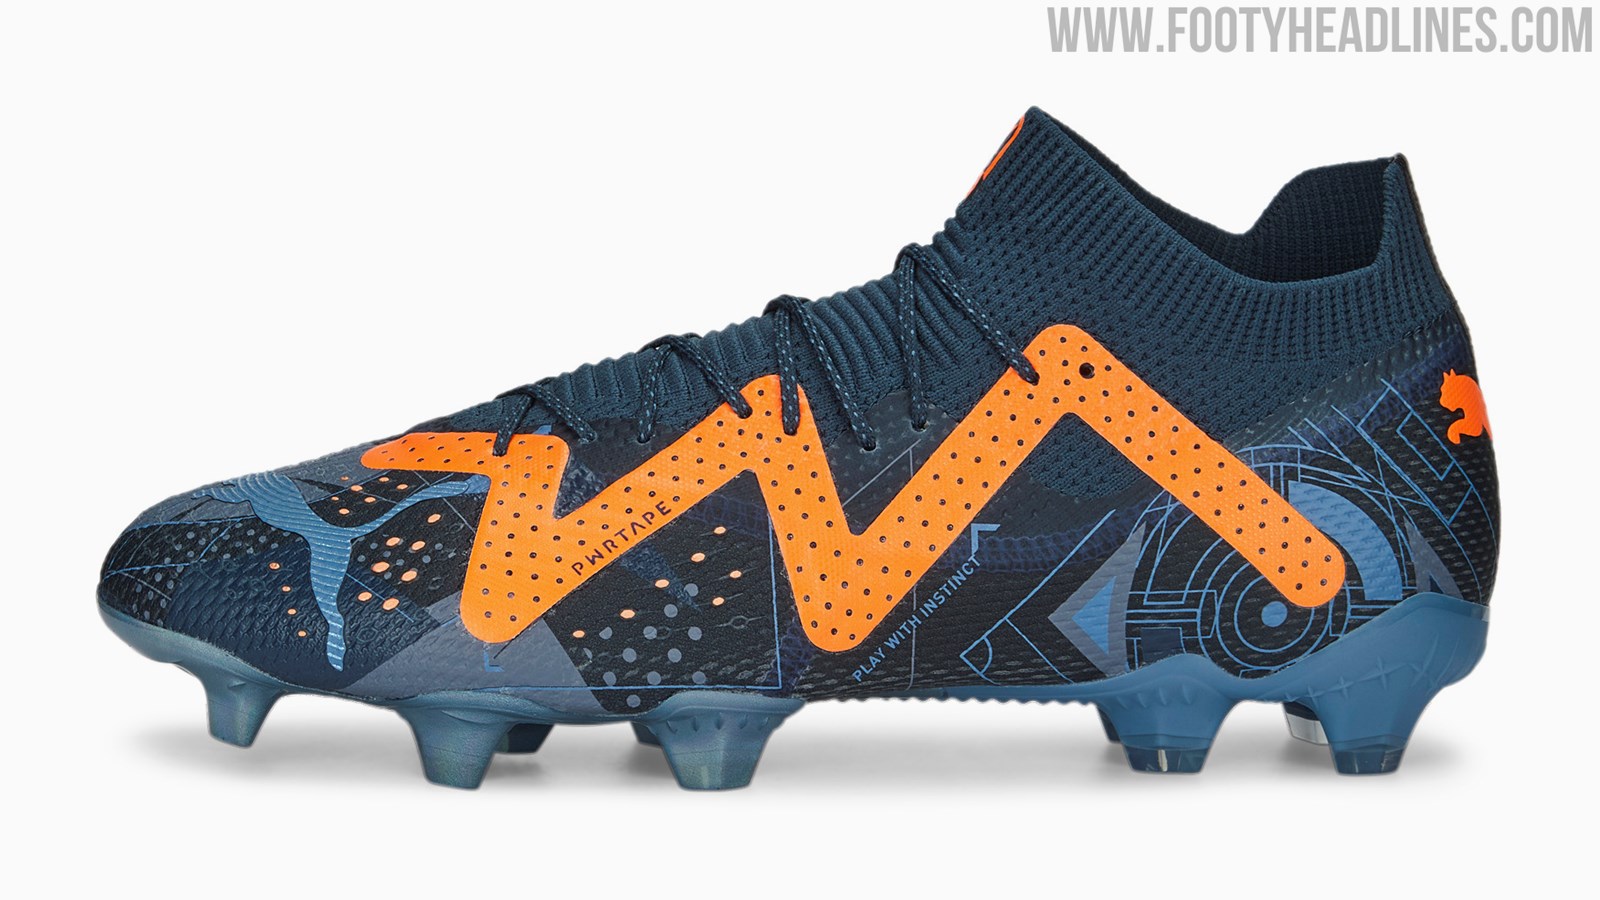 Sell All-New Puma Future Ultimate Boots Released - Worn by Neymar ...